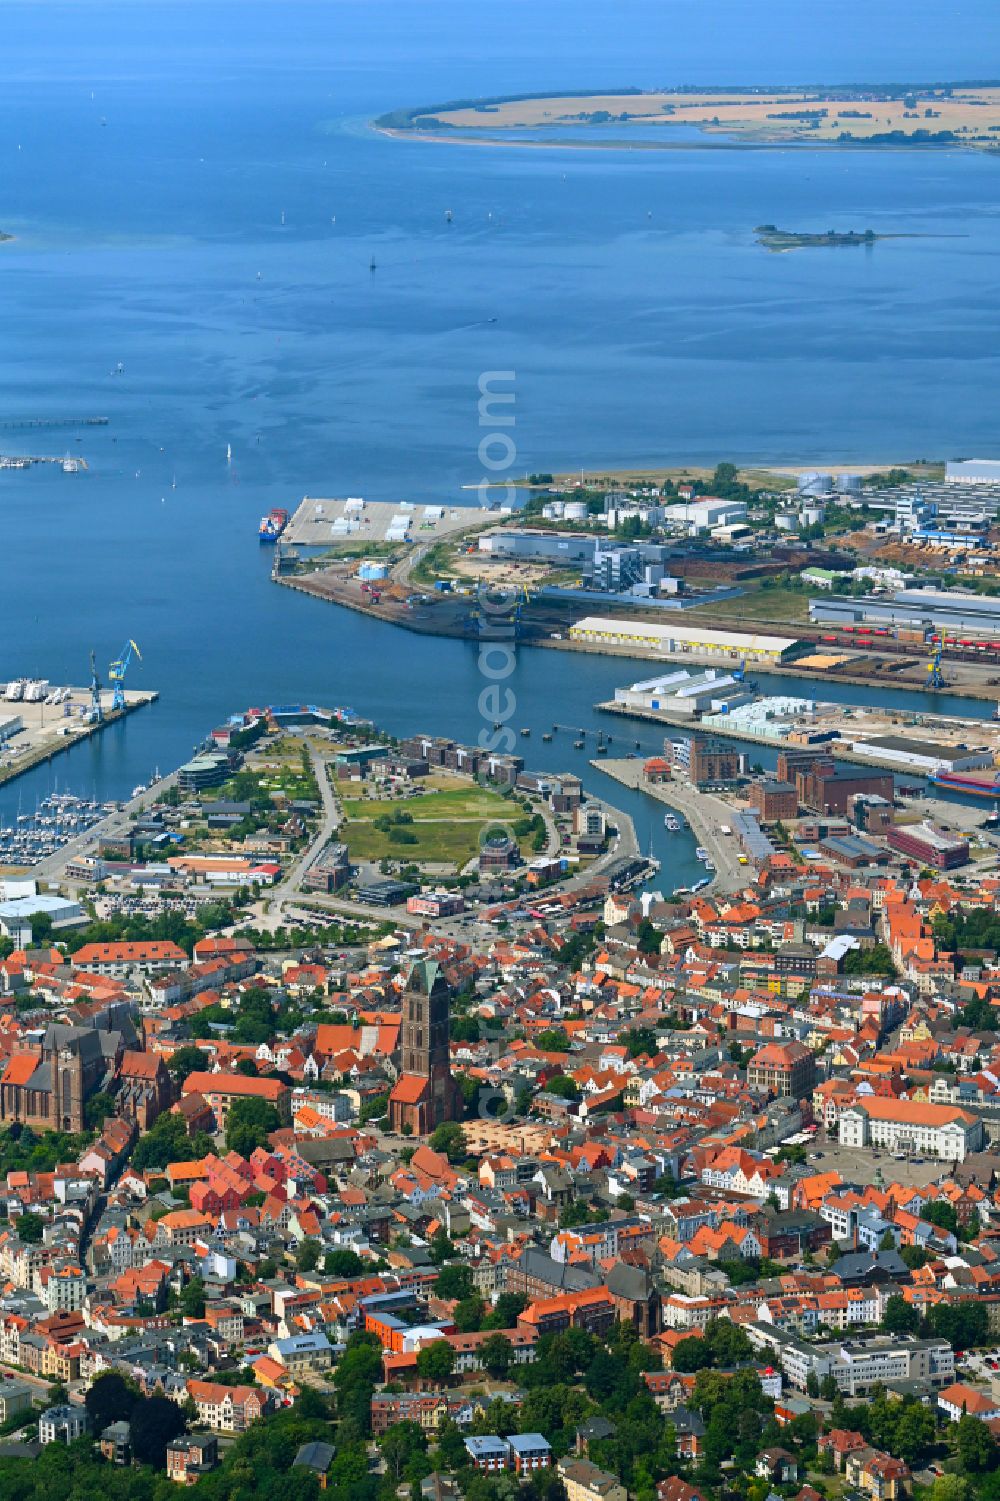 Wismar from above - Old Town area and city center in Hansestadt Wismar at the baltic sea coast in the state Mecklenburg - Western Pomerania, Germany